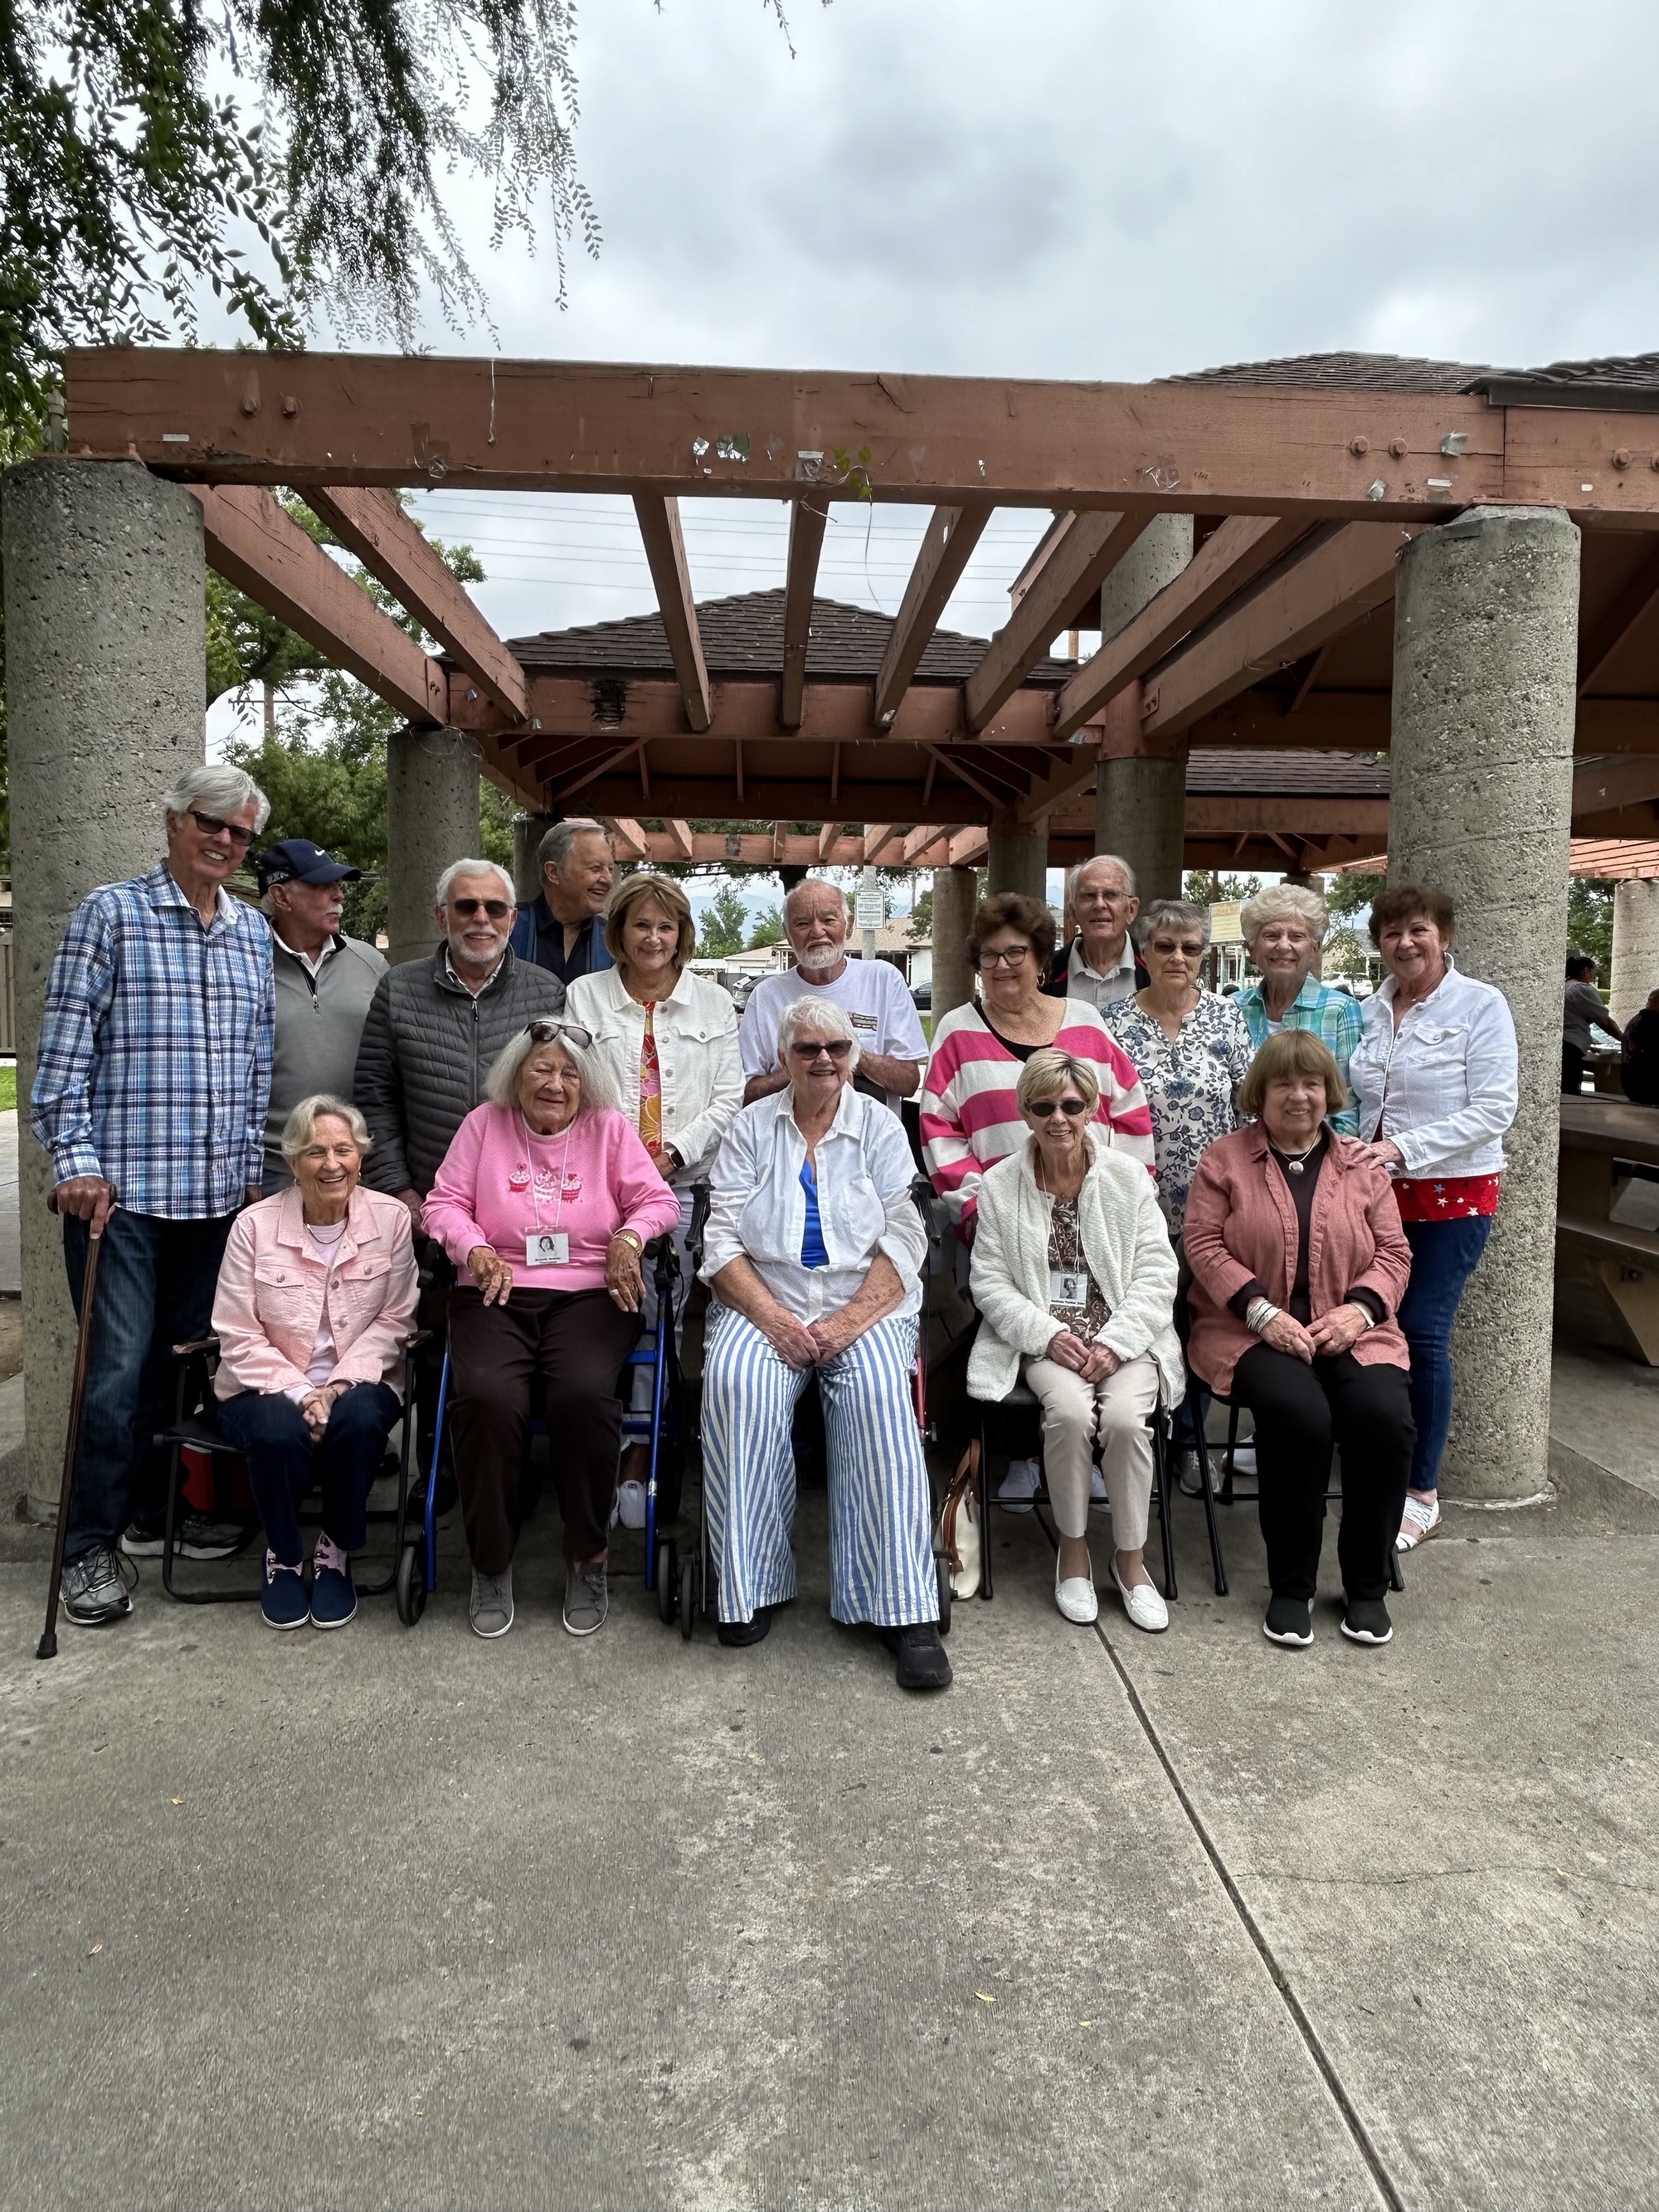 23-06-18-Class of 56 Reunion at CHS_No_14_resize